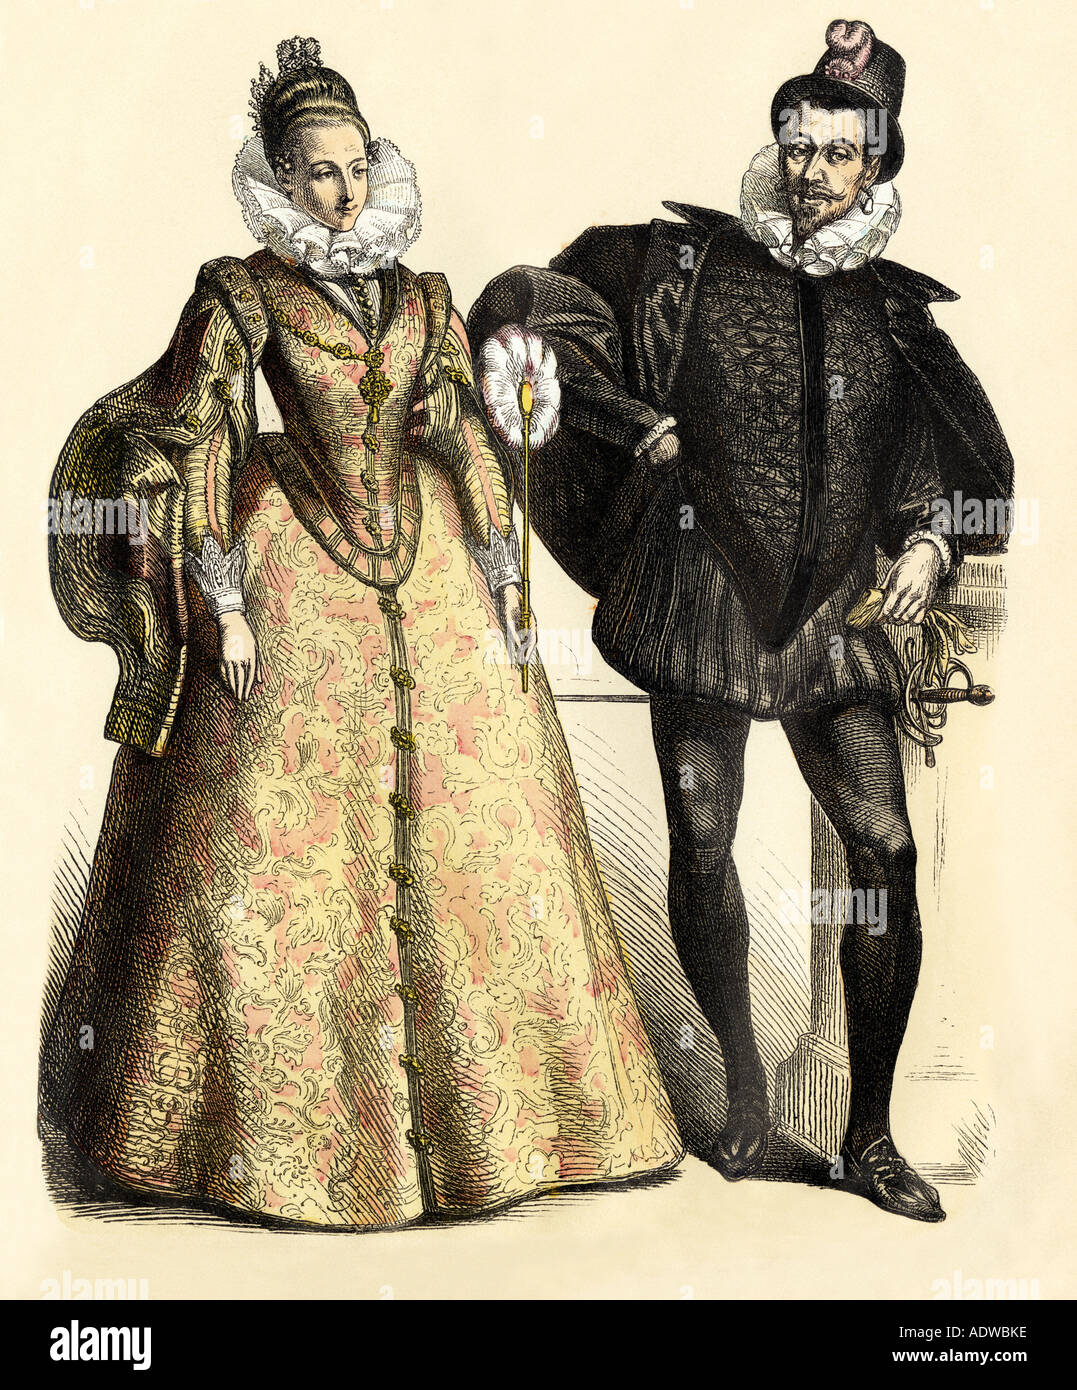 Spanish nobility of the mid 1500s. Hand-colored print Stock Photo